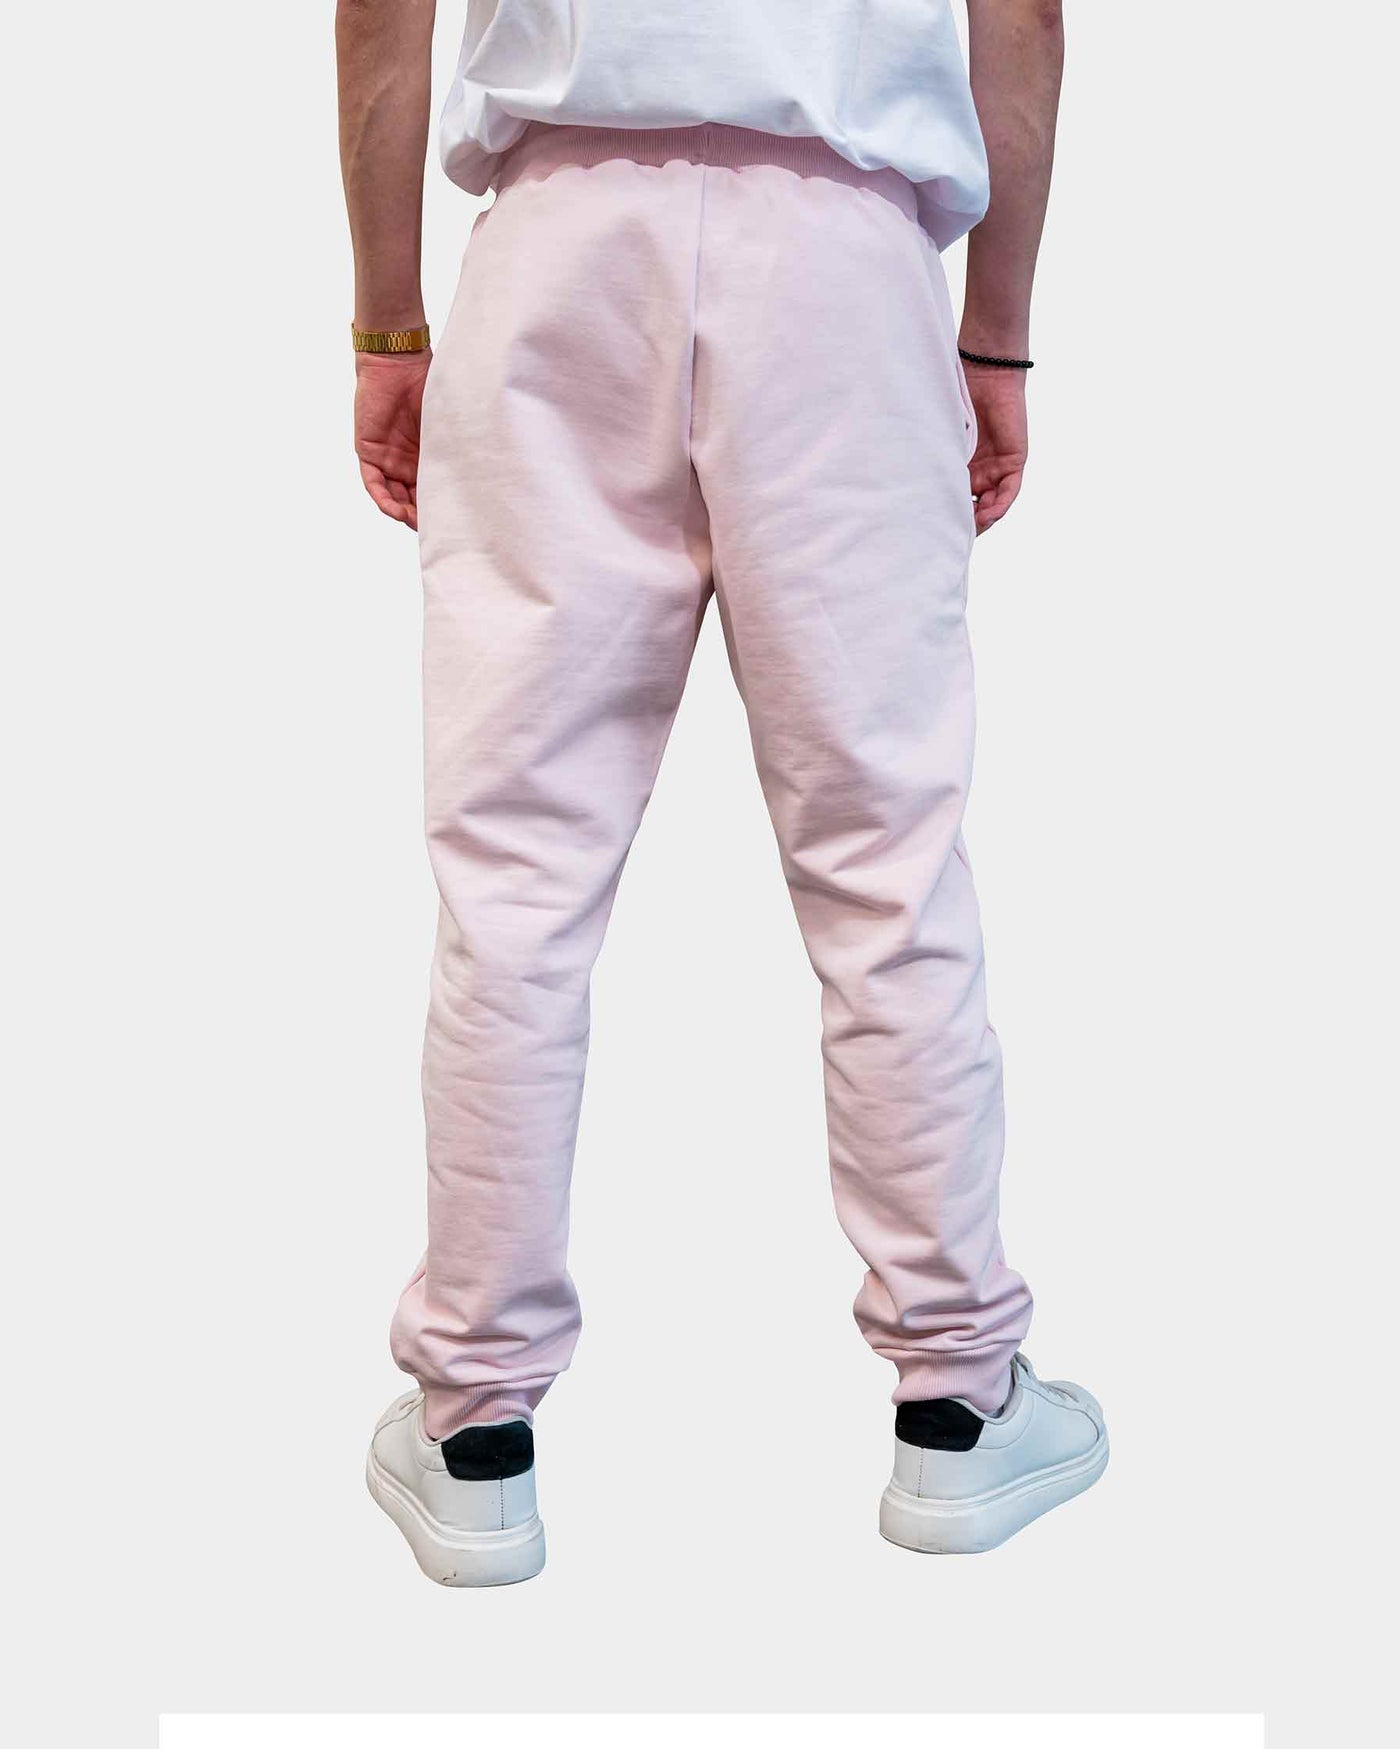 WILLIAM Jogger Pastell Pink